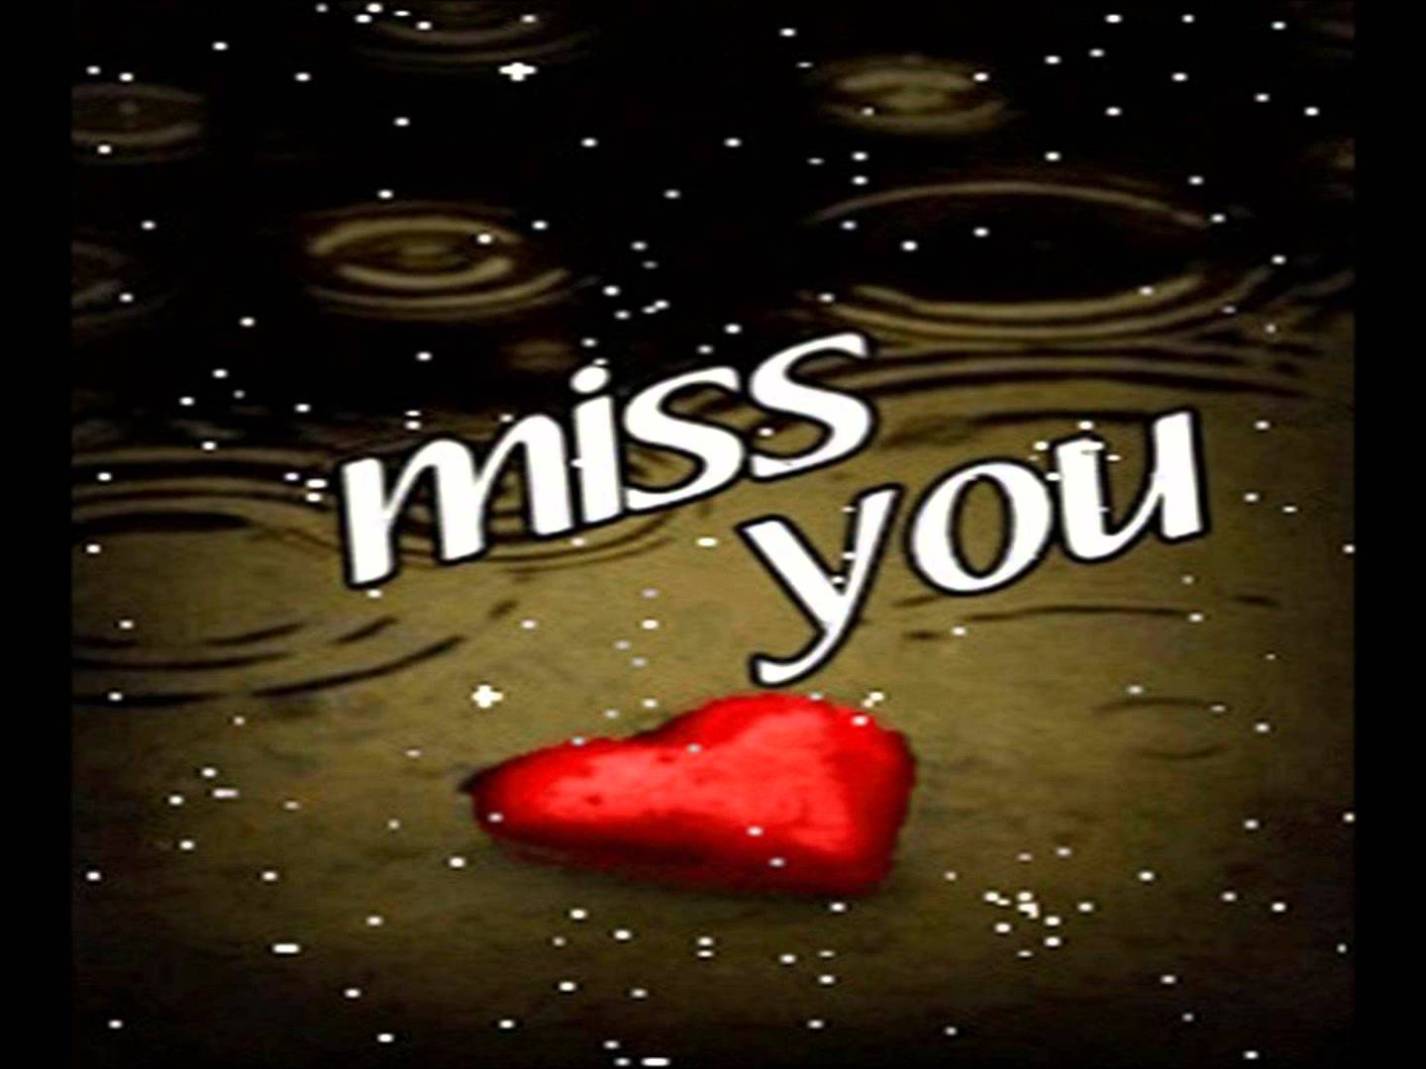 I Miss You HD Wallpapers | Miss you images, Miss you, I miss you wallpaper